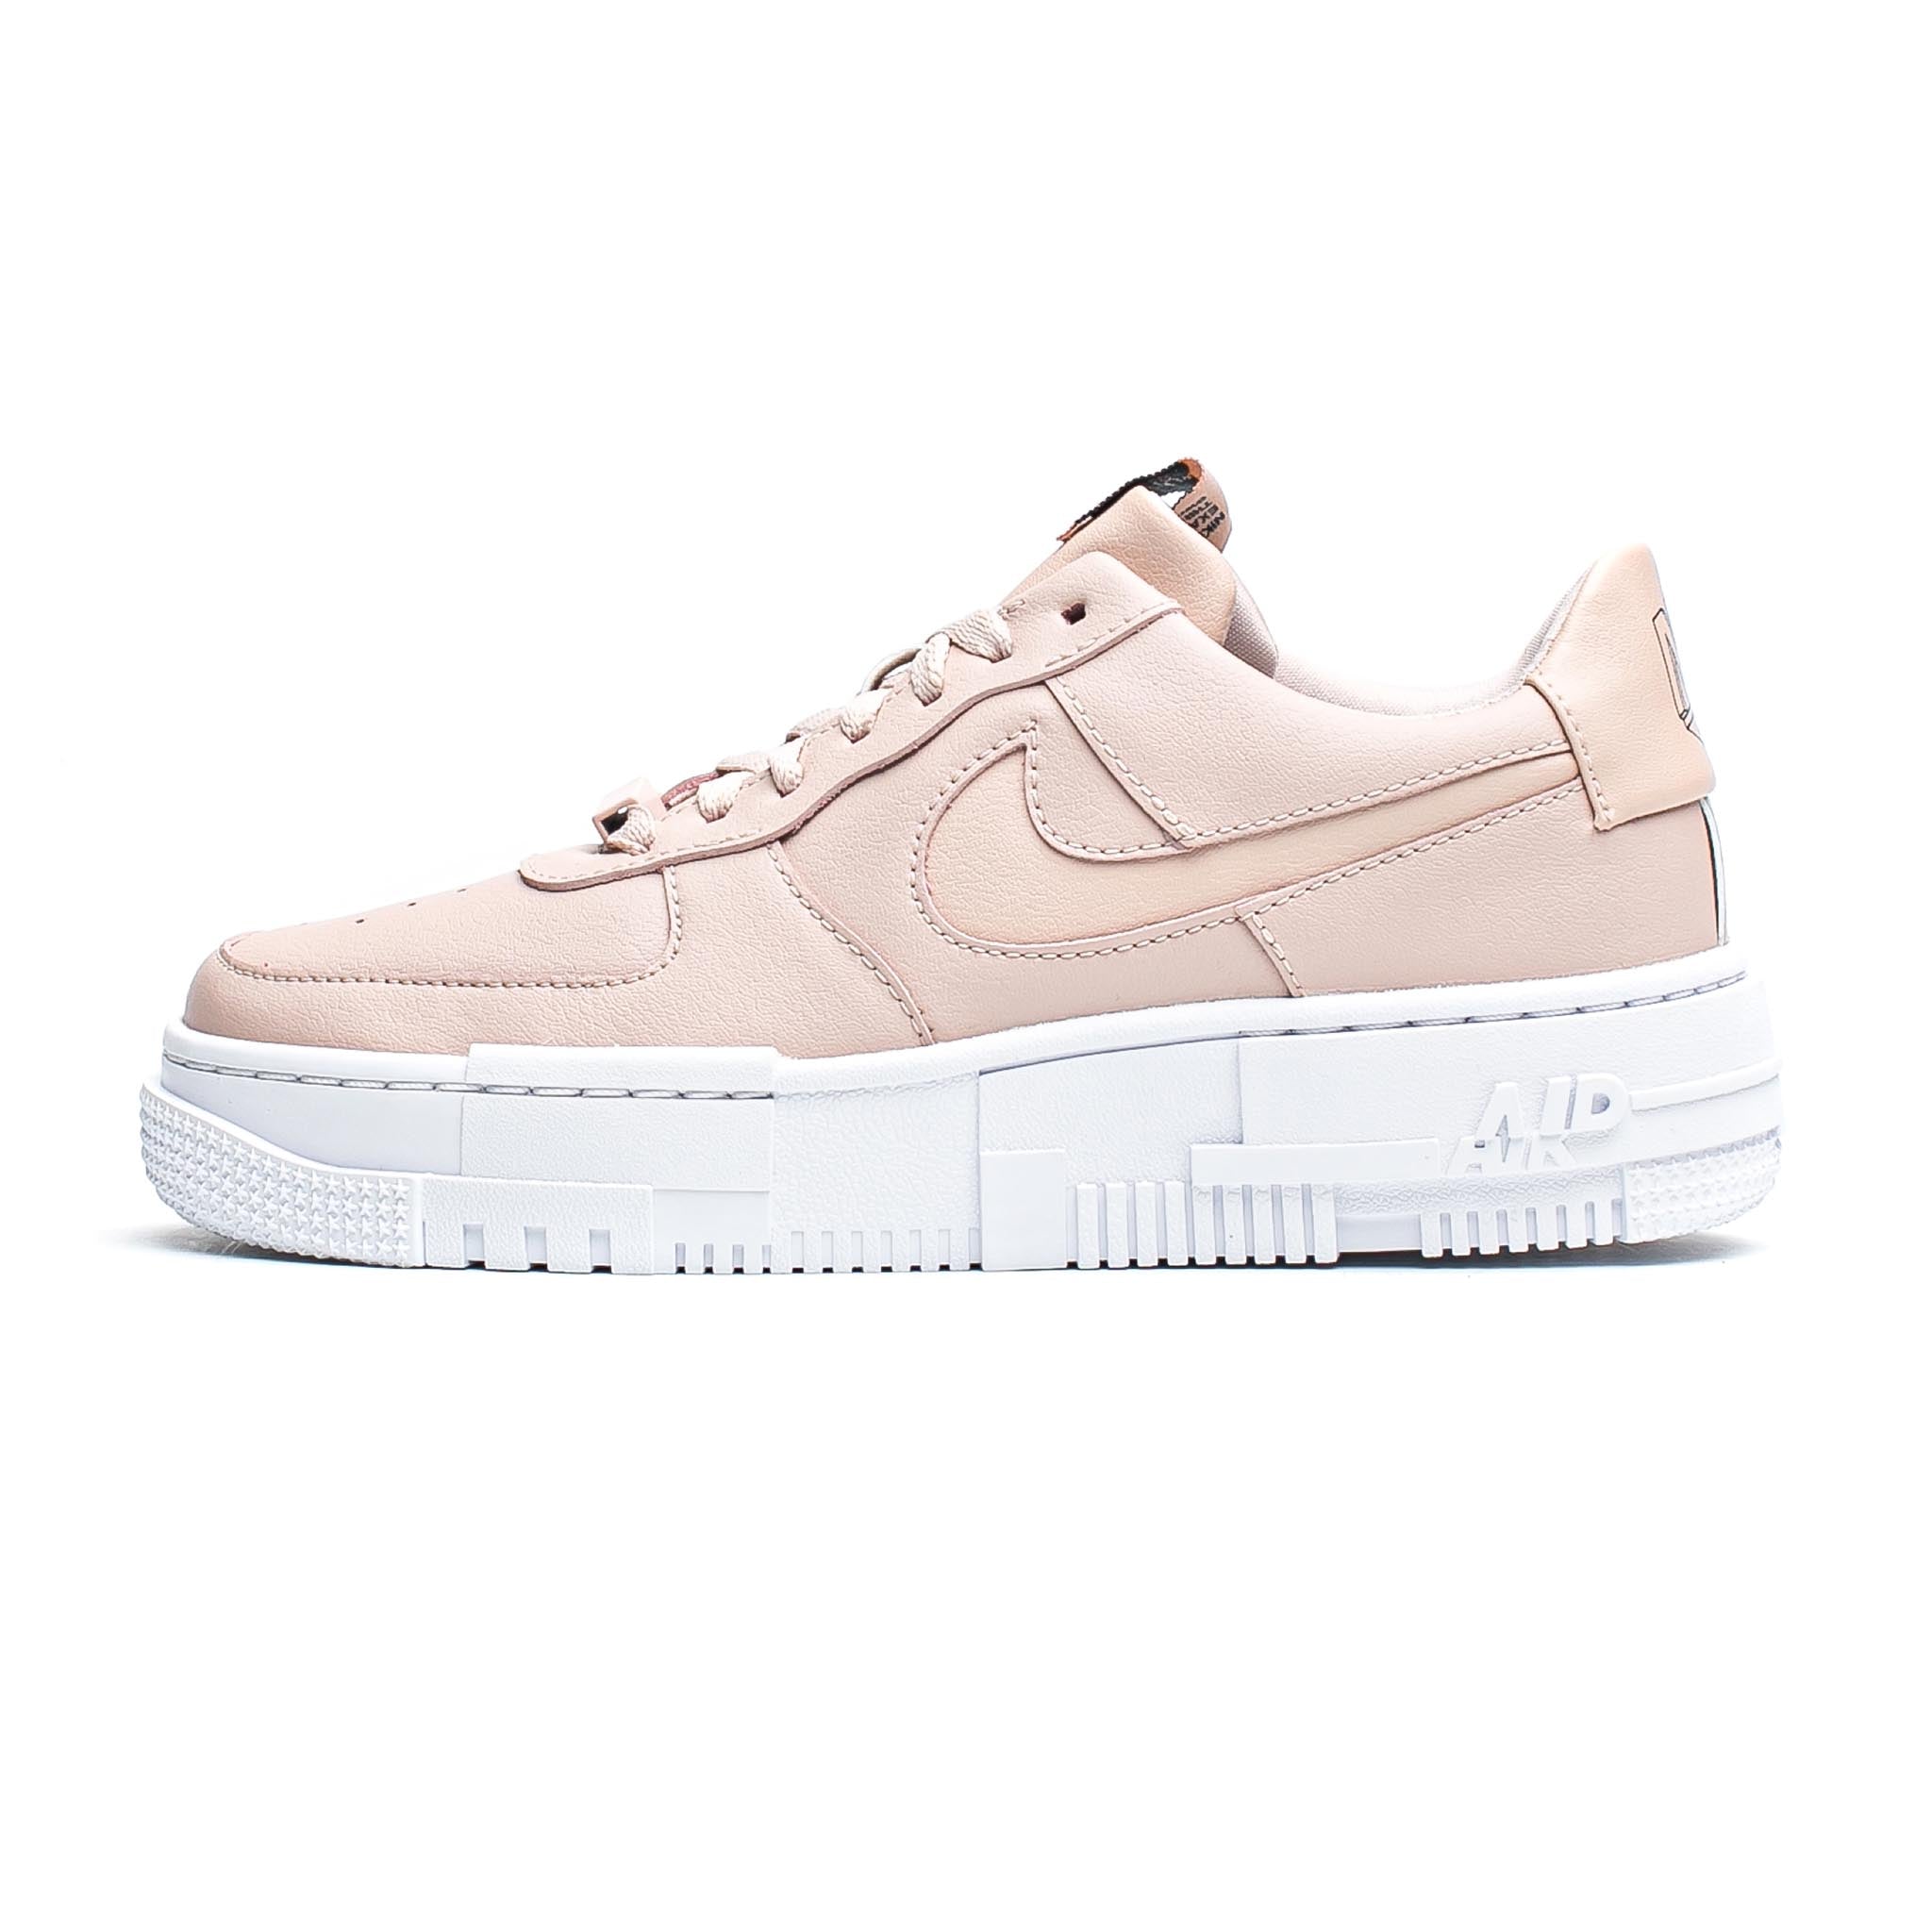 Nike Air Force 1 Pixel 'Particle Beige'